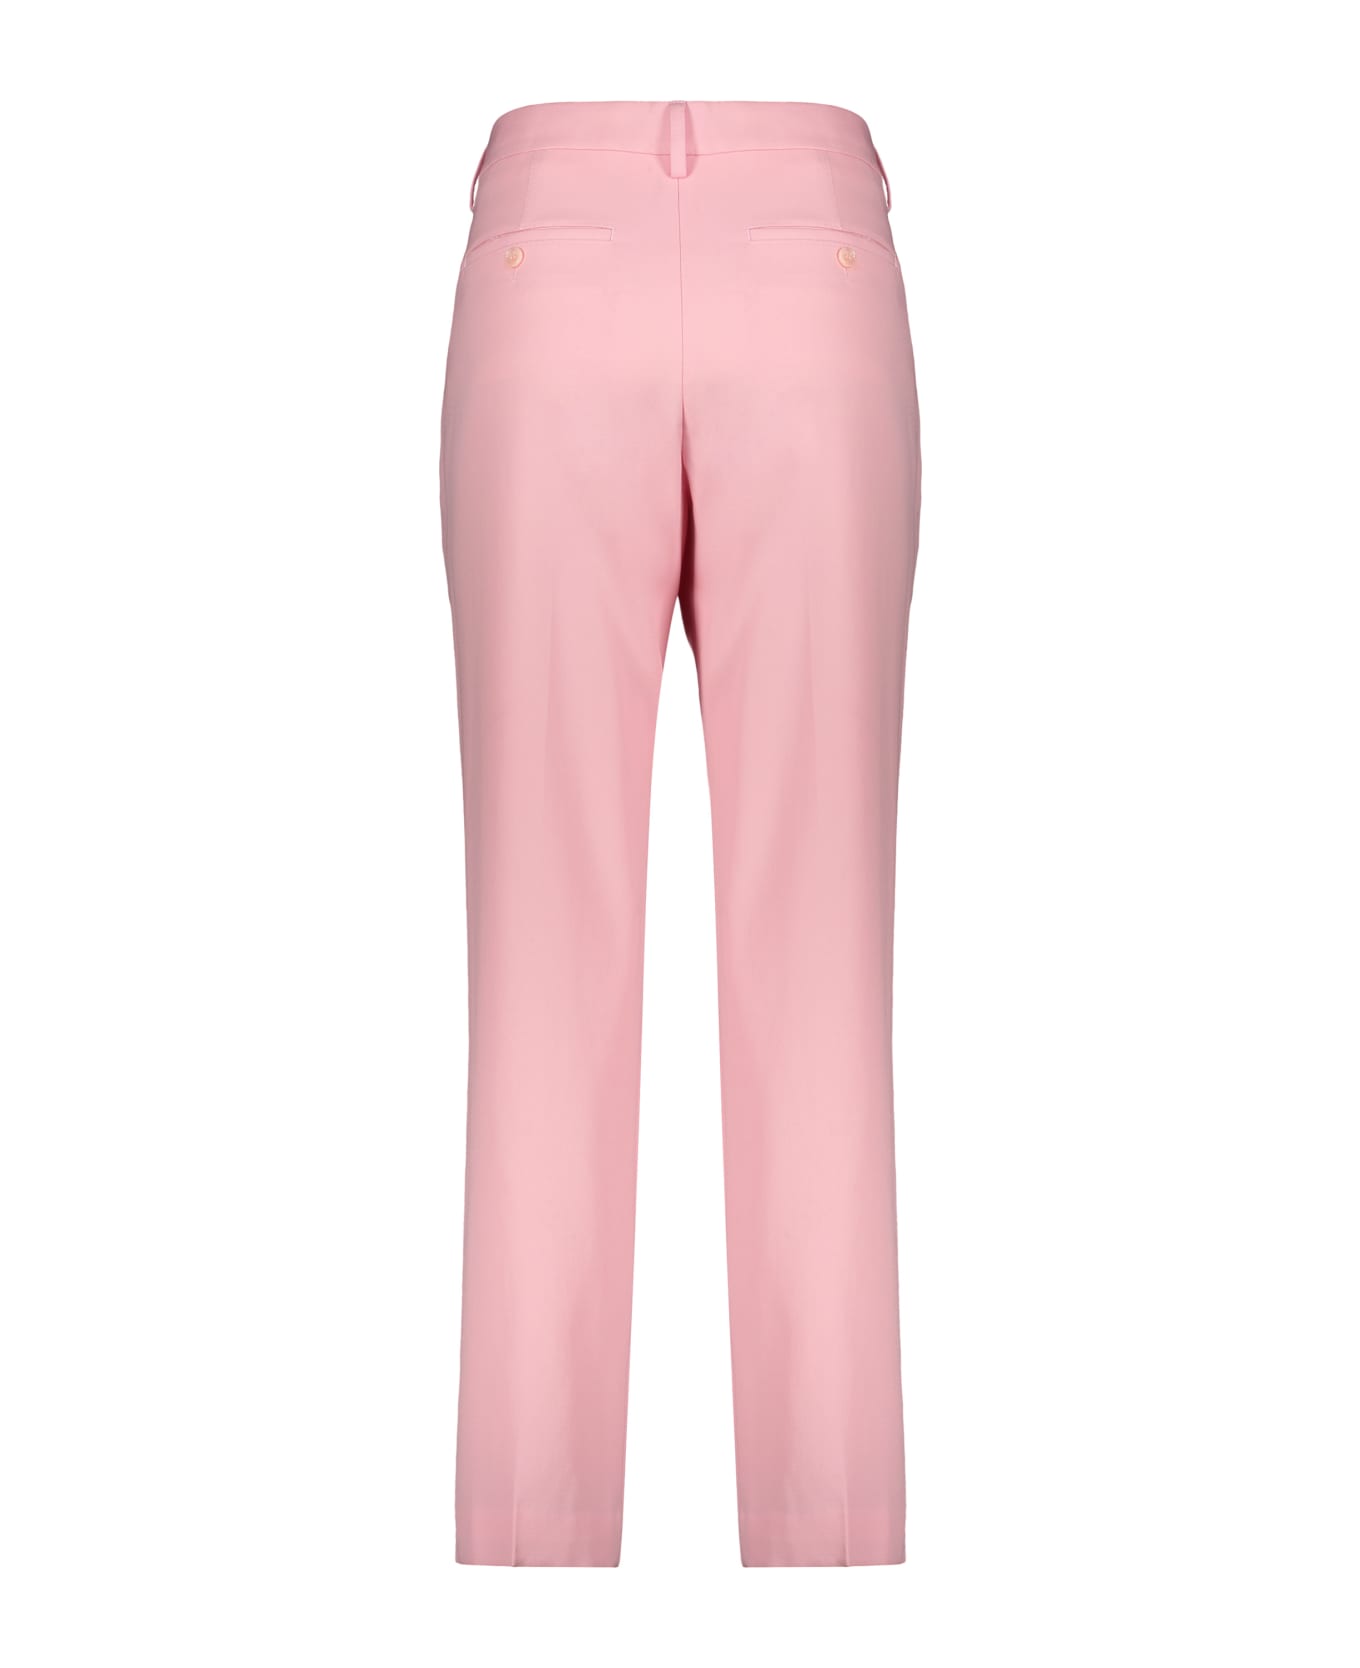 Burberry Wool Trousers - Pink ボトムス